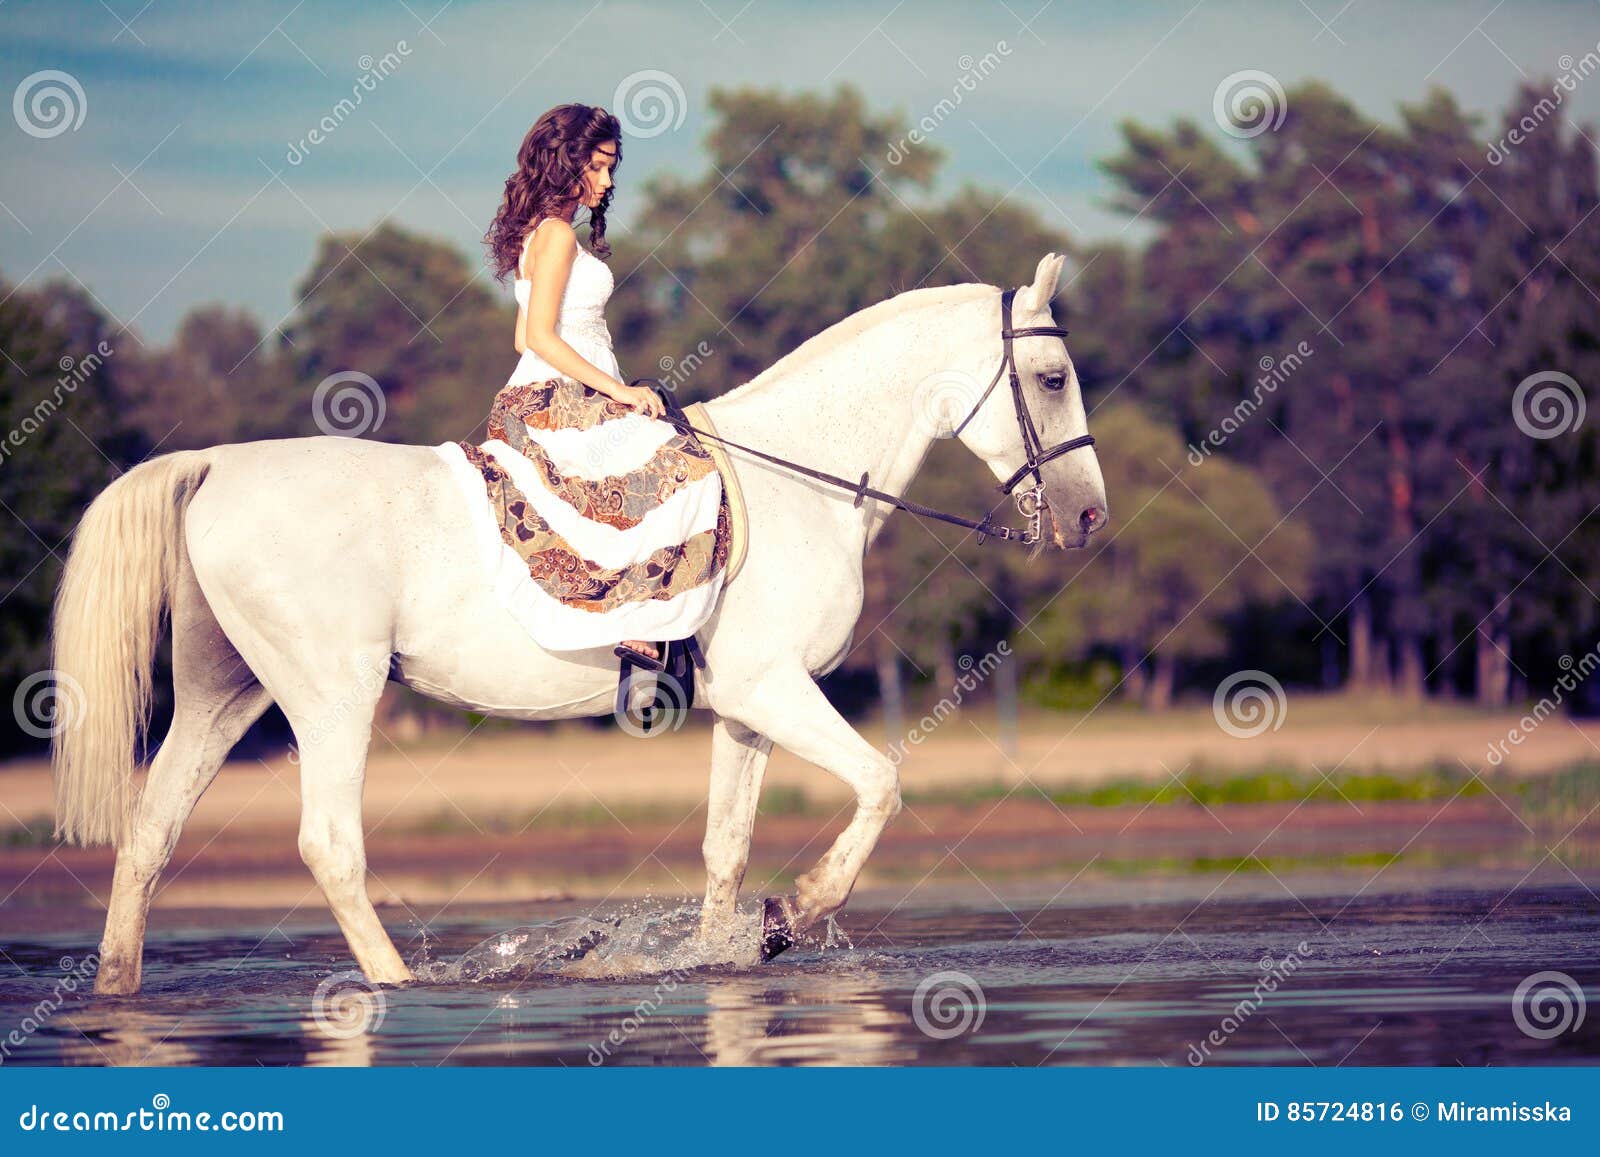 young woman on a horse. horseback rider, woman riding horse on b